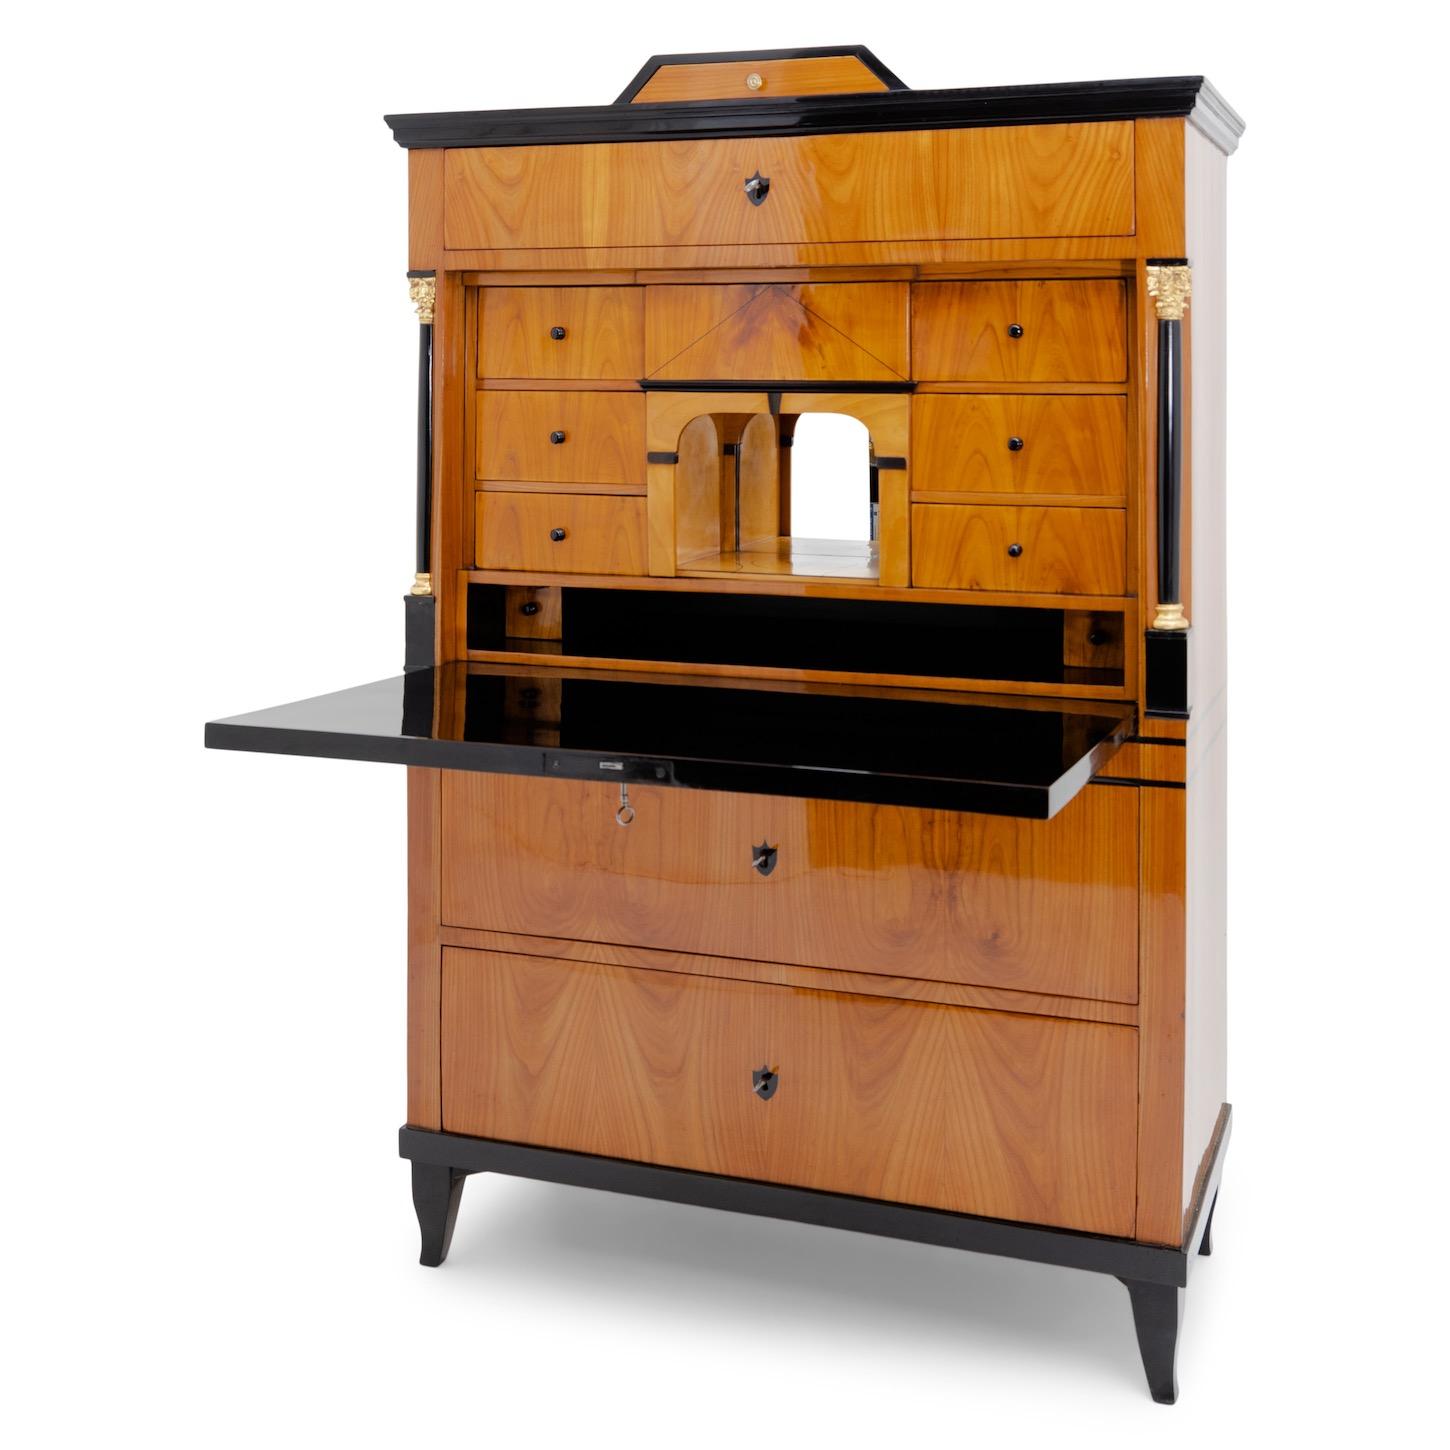 A cherry veneered secretaire standing on low ebonized S-legs, with a two-drawer chest of drawers and a rich interior. The secretaire is visually divided by a surrounding black double line. Ebonized and partly gilded columns with Corinthian capitals